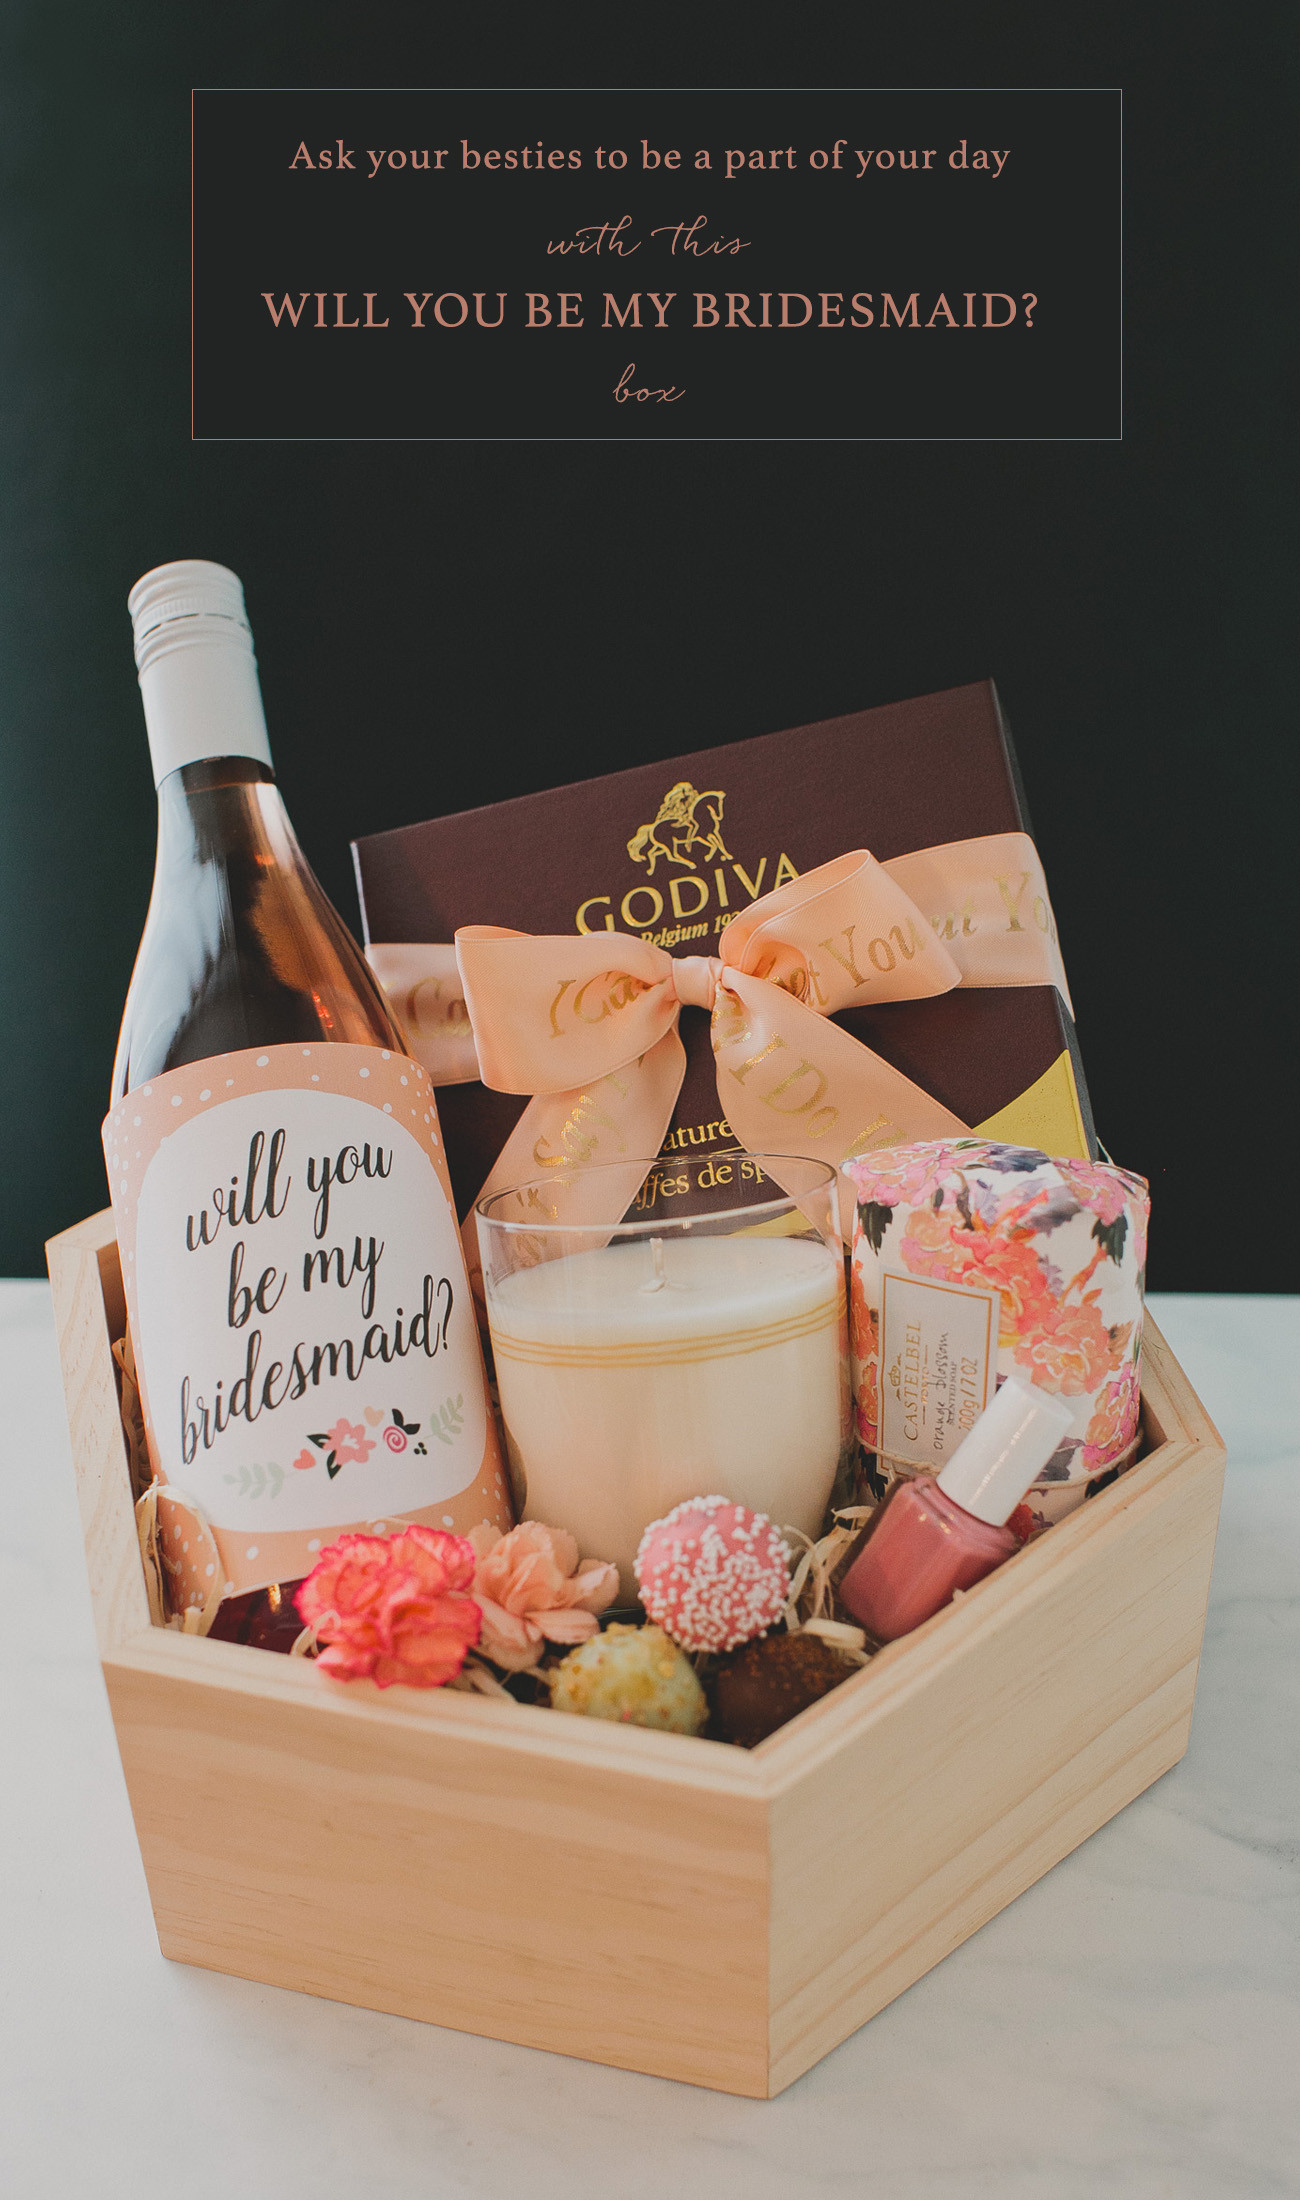 The Best Ideas for Bridesmaid Thank You Gift Box Ideas Home, Family